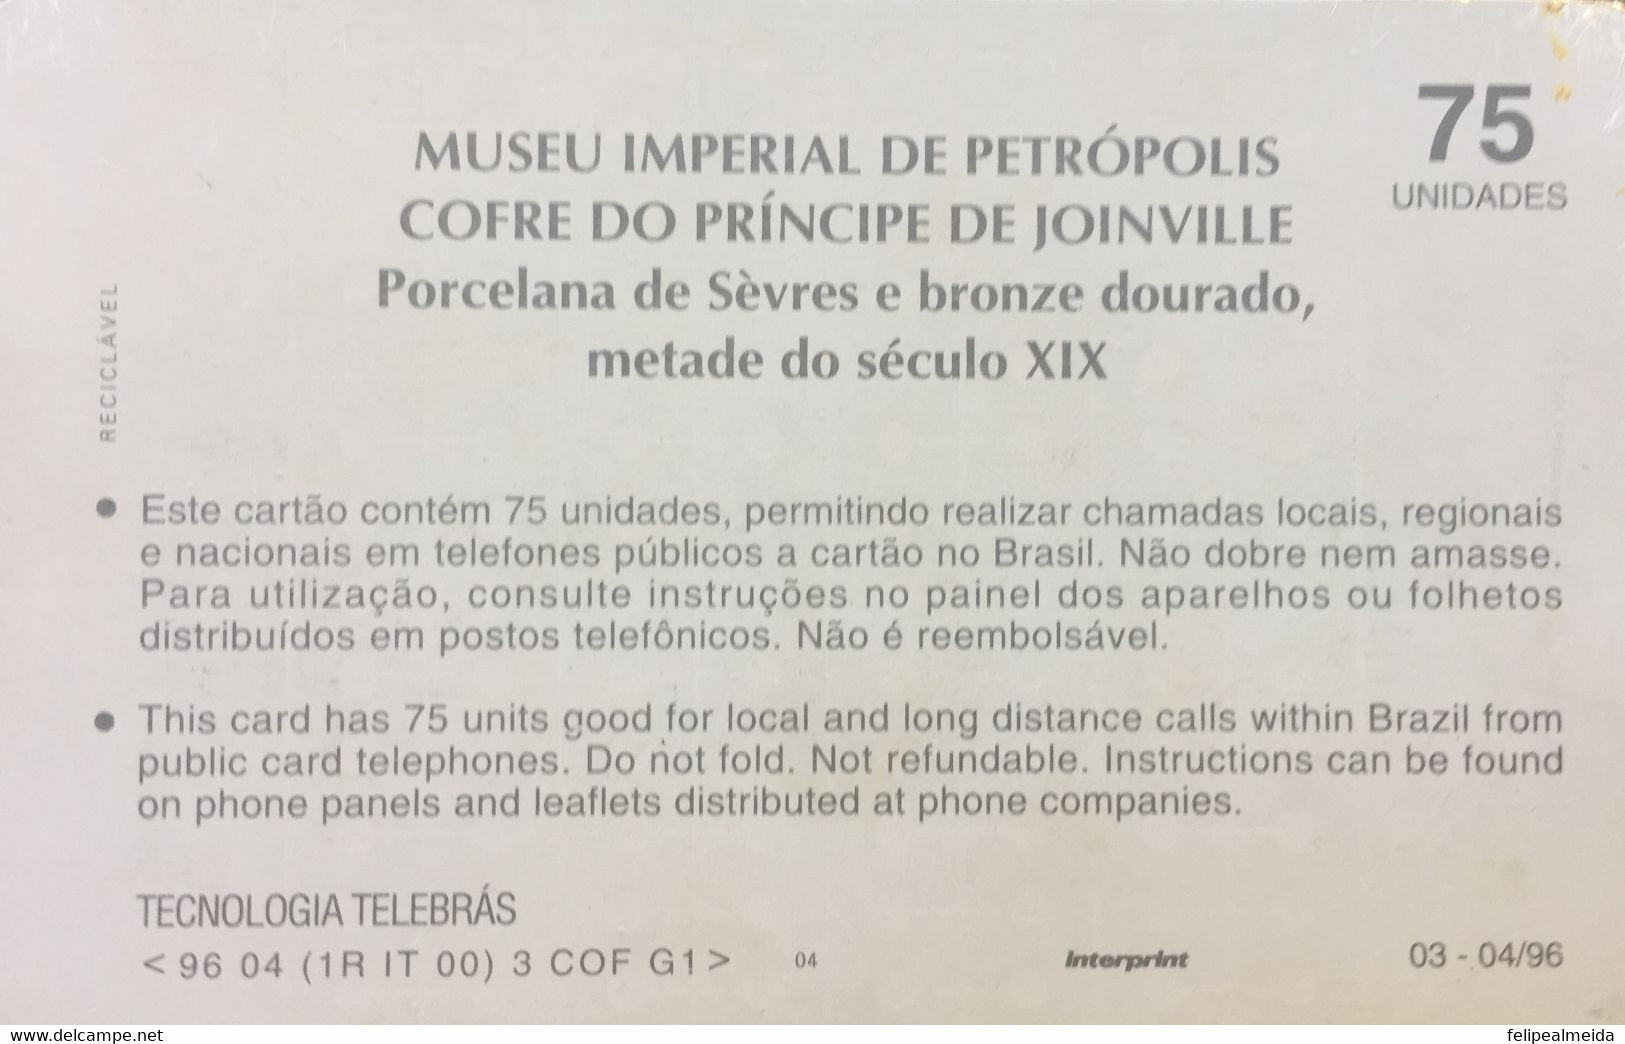 Phone Card Manufactured By Telebras In 1996 - Series Museums - Imperial Museum Of Pretrópolis - Coffer Of The Prince Of - Cultural